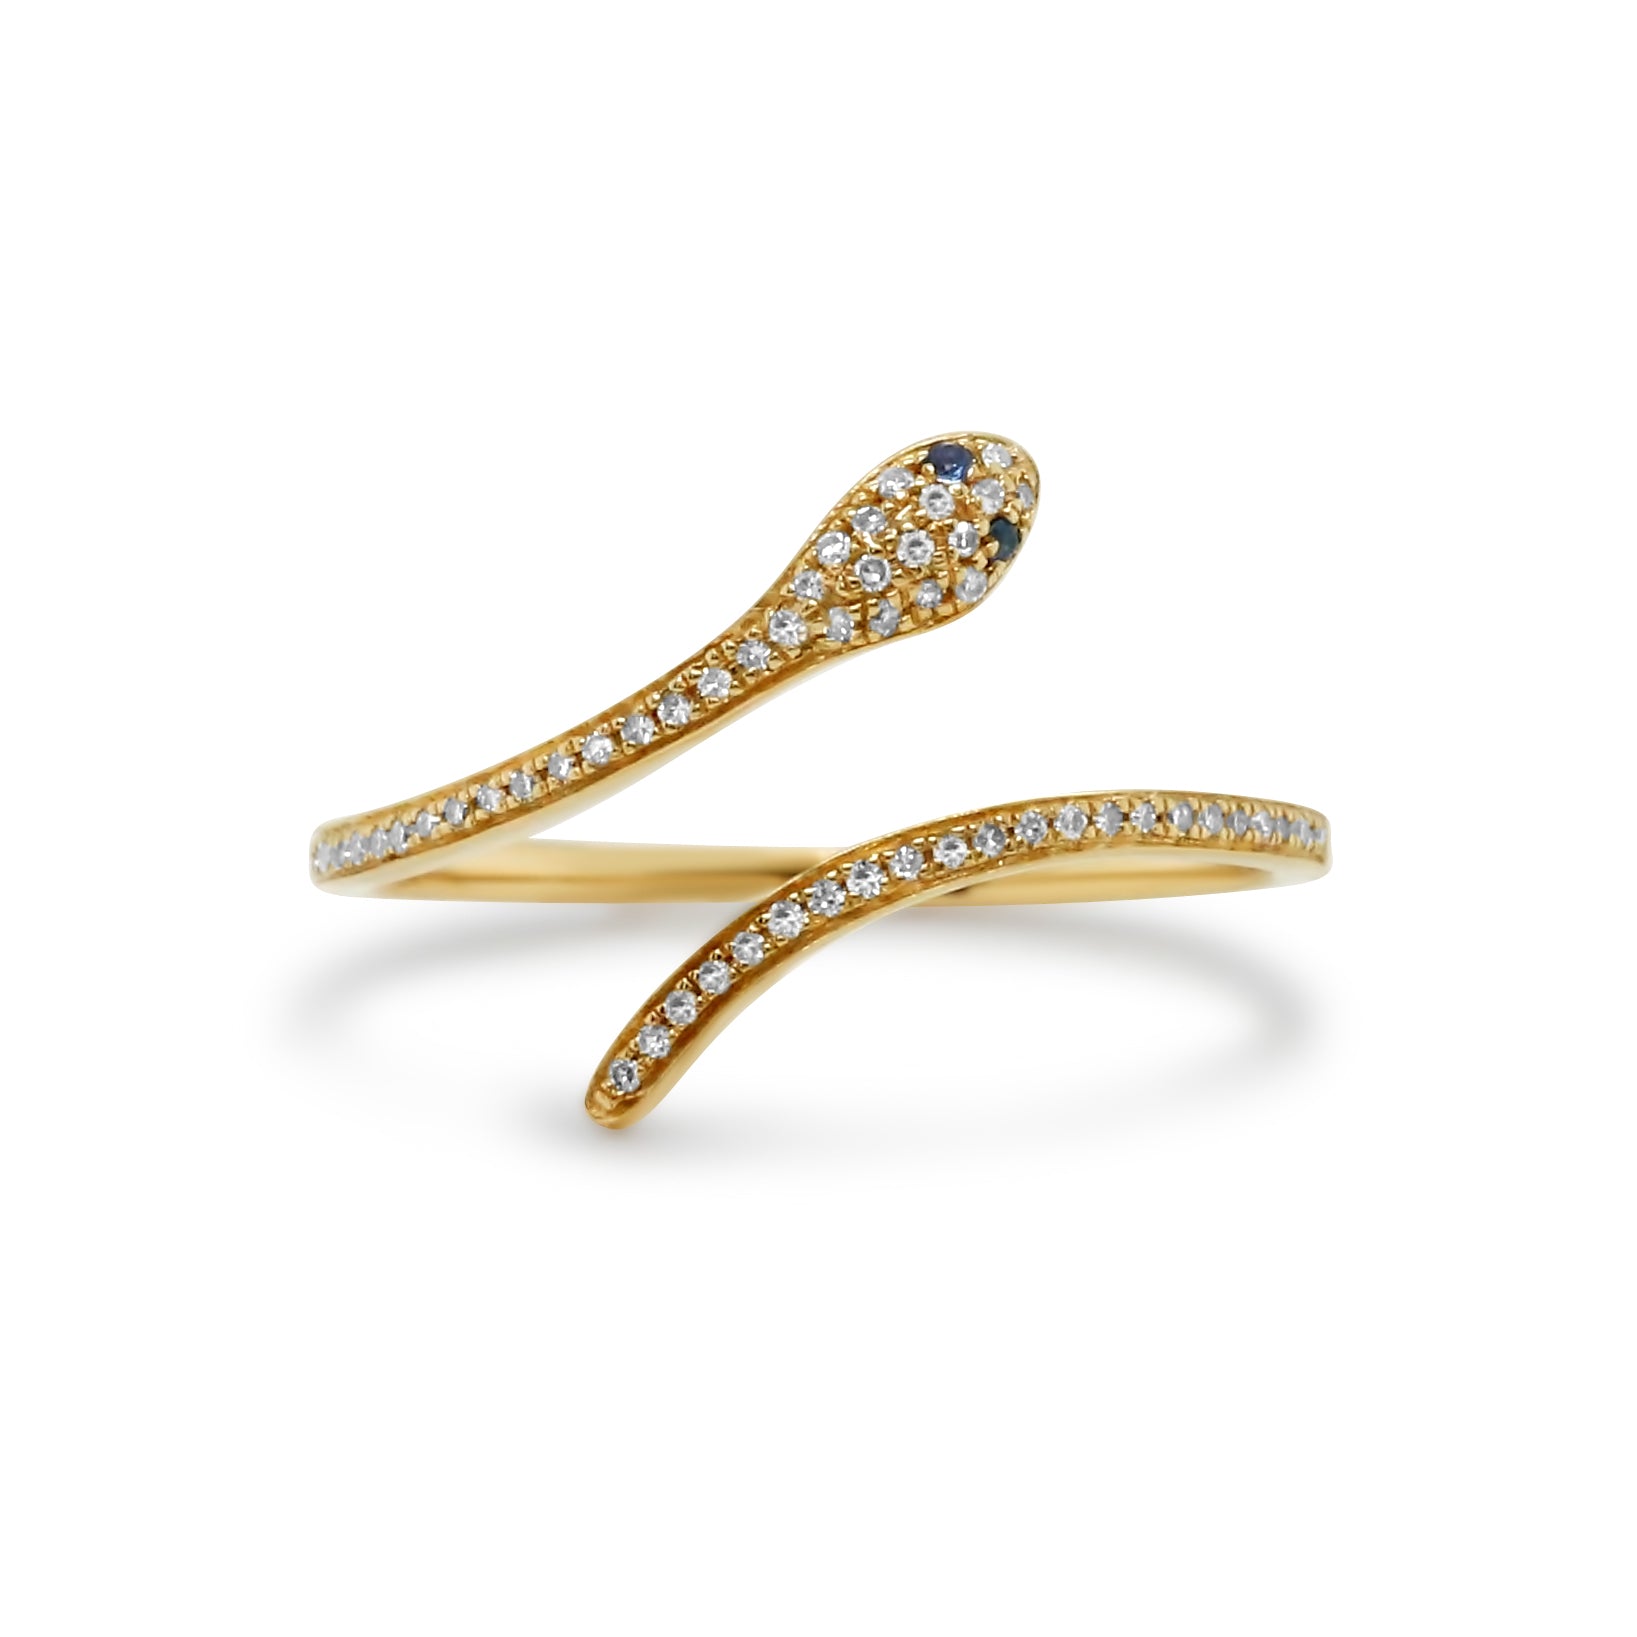 14k yellow gold diamond pave open snake ring with sapphire eyes